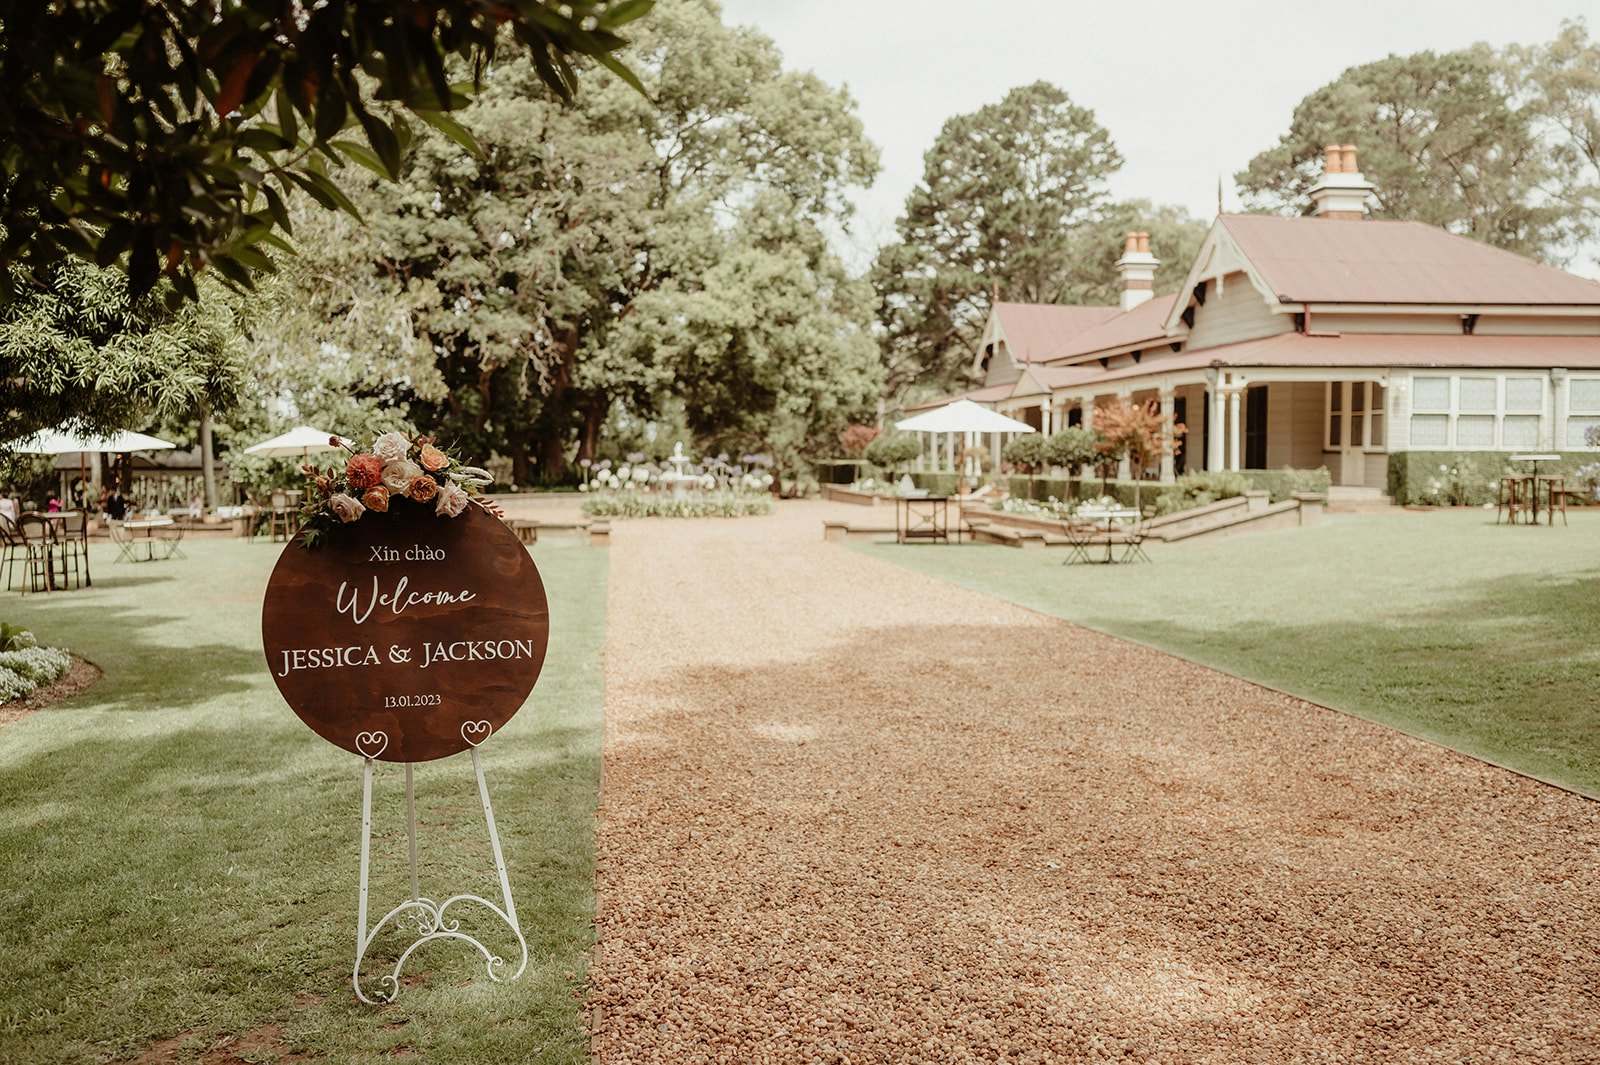 Wedding welcome sign with homestead in background